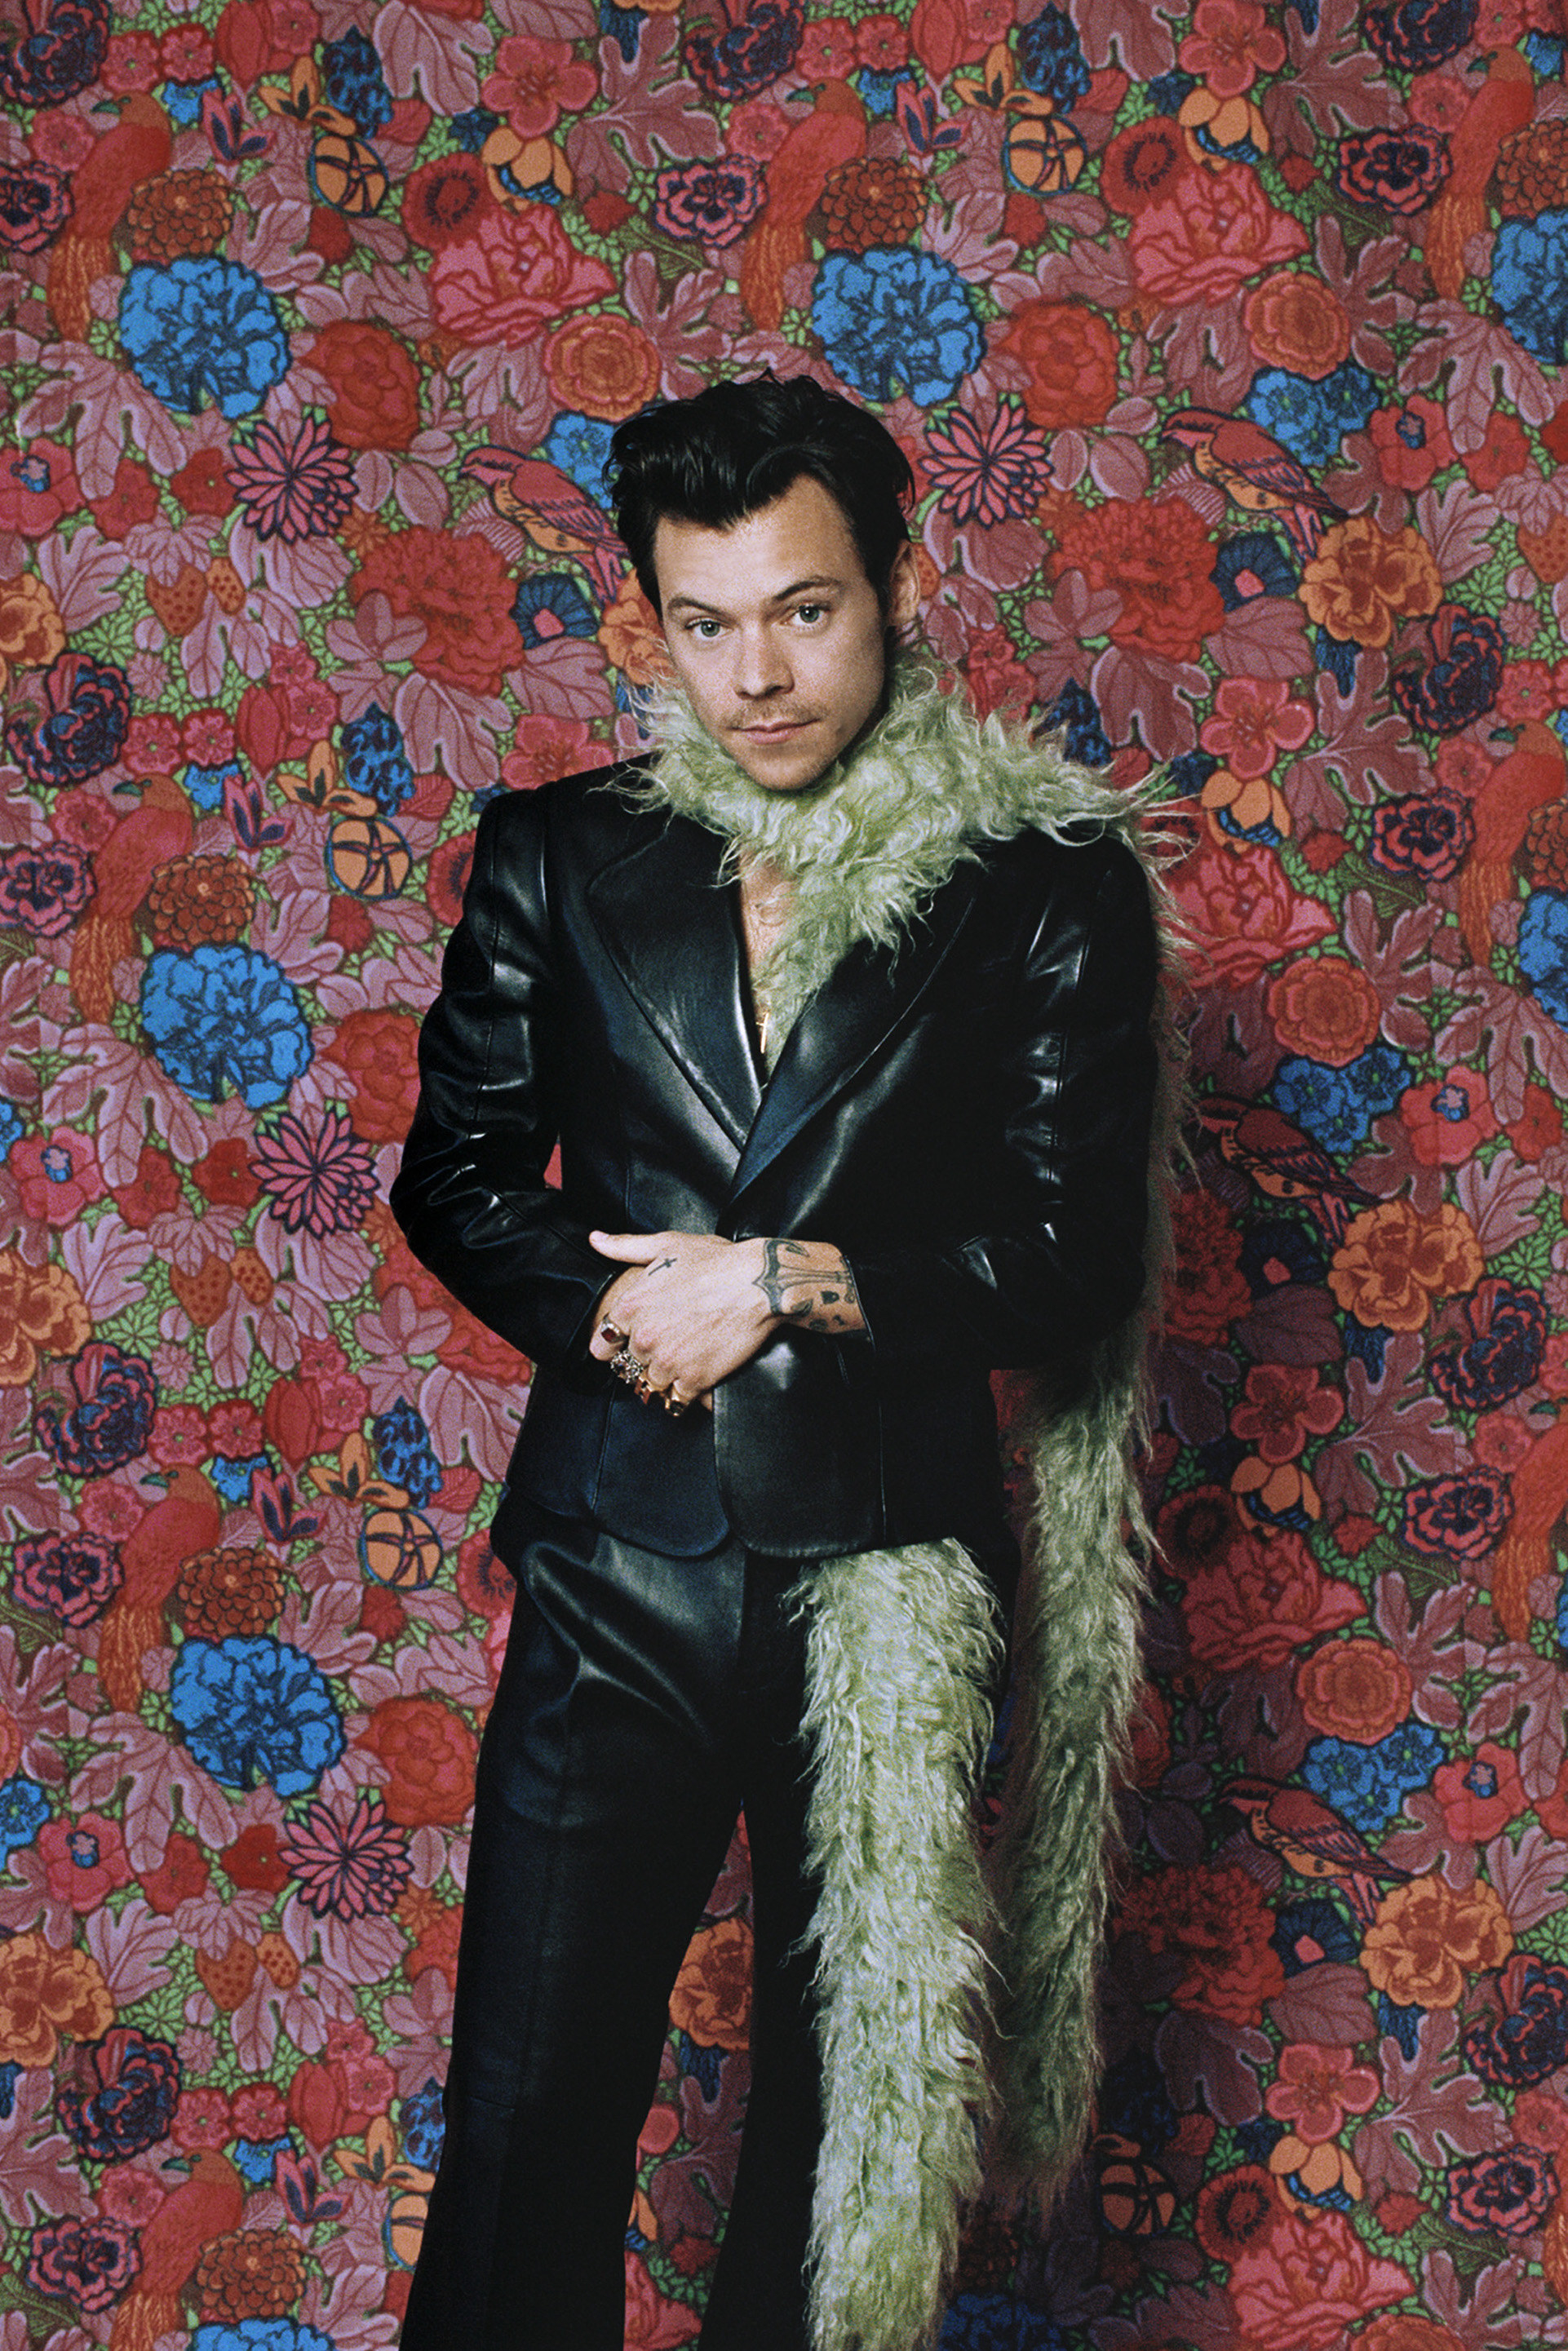 Styles at the Grammys in 2021